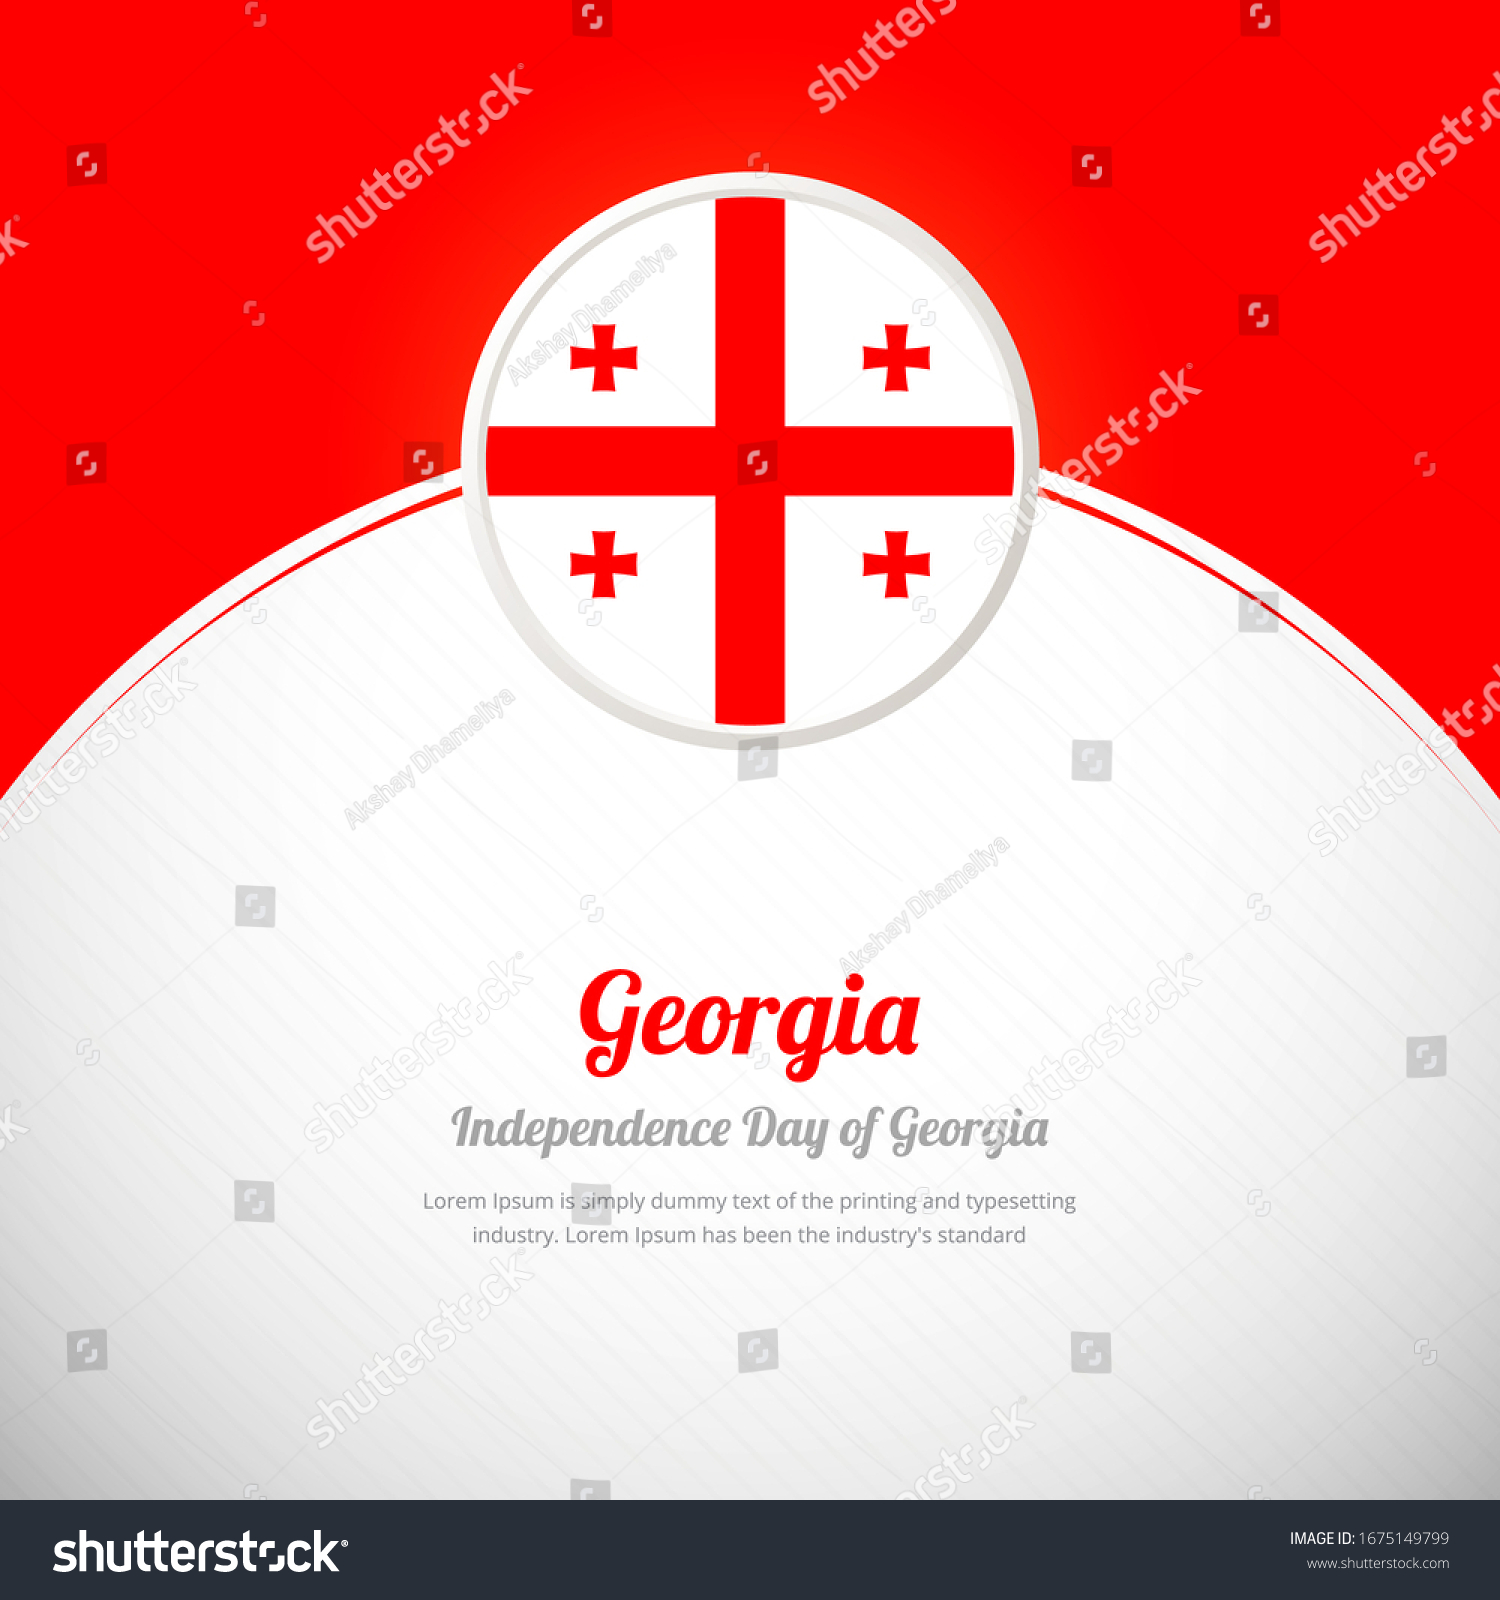 SVG of Georgia happy independence day with modern colorful country flag background svg